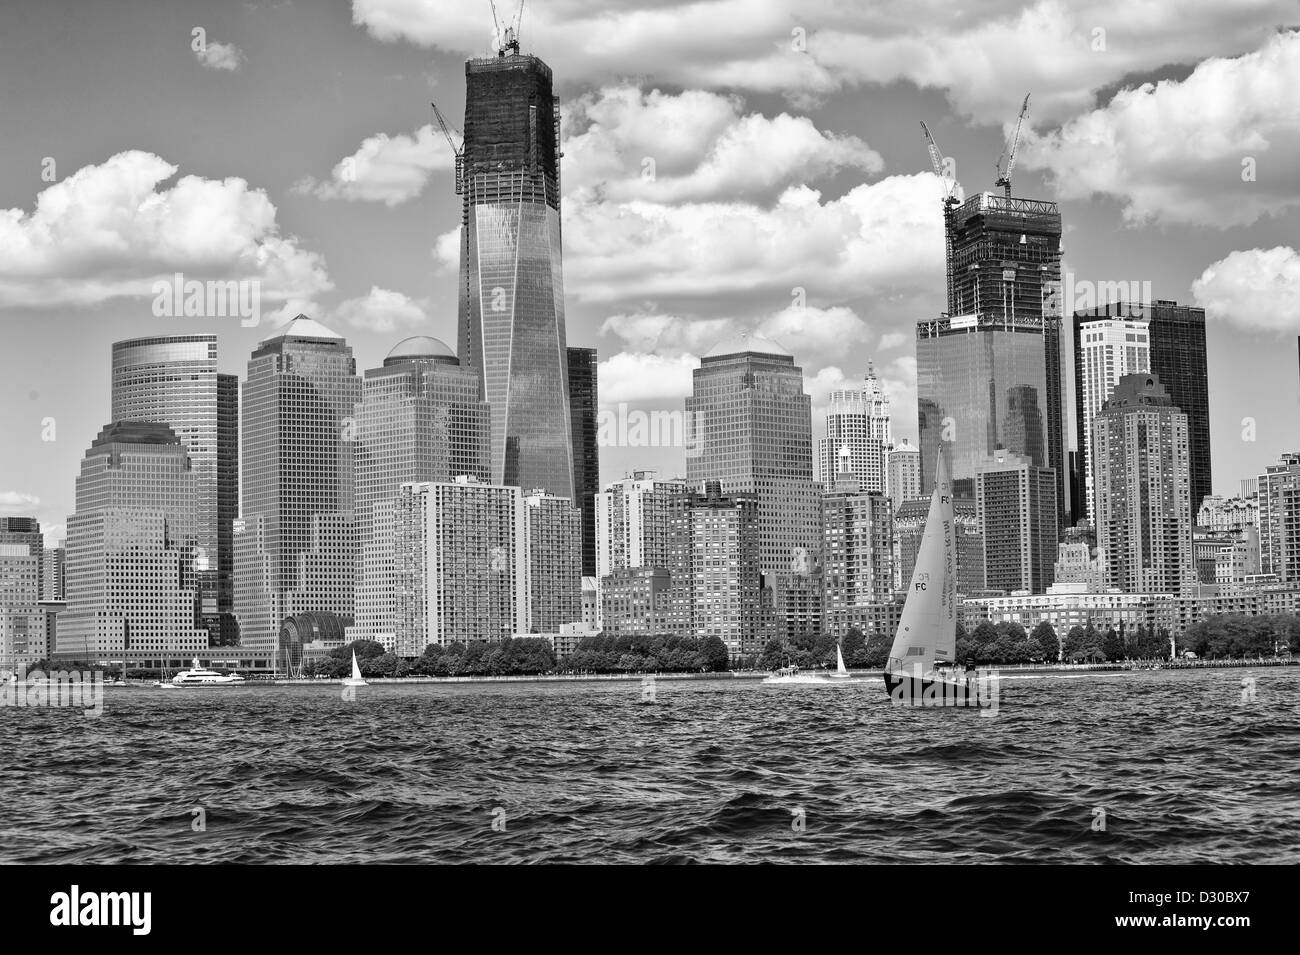 New York City skyline and river in Black and White Stock Photo